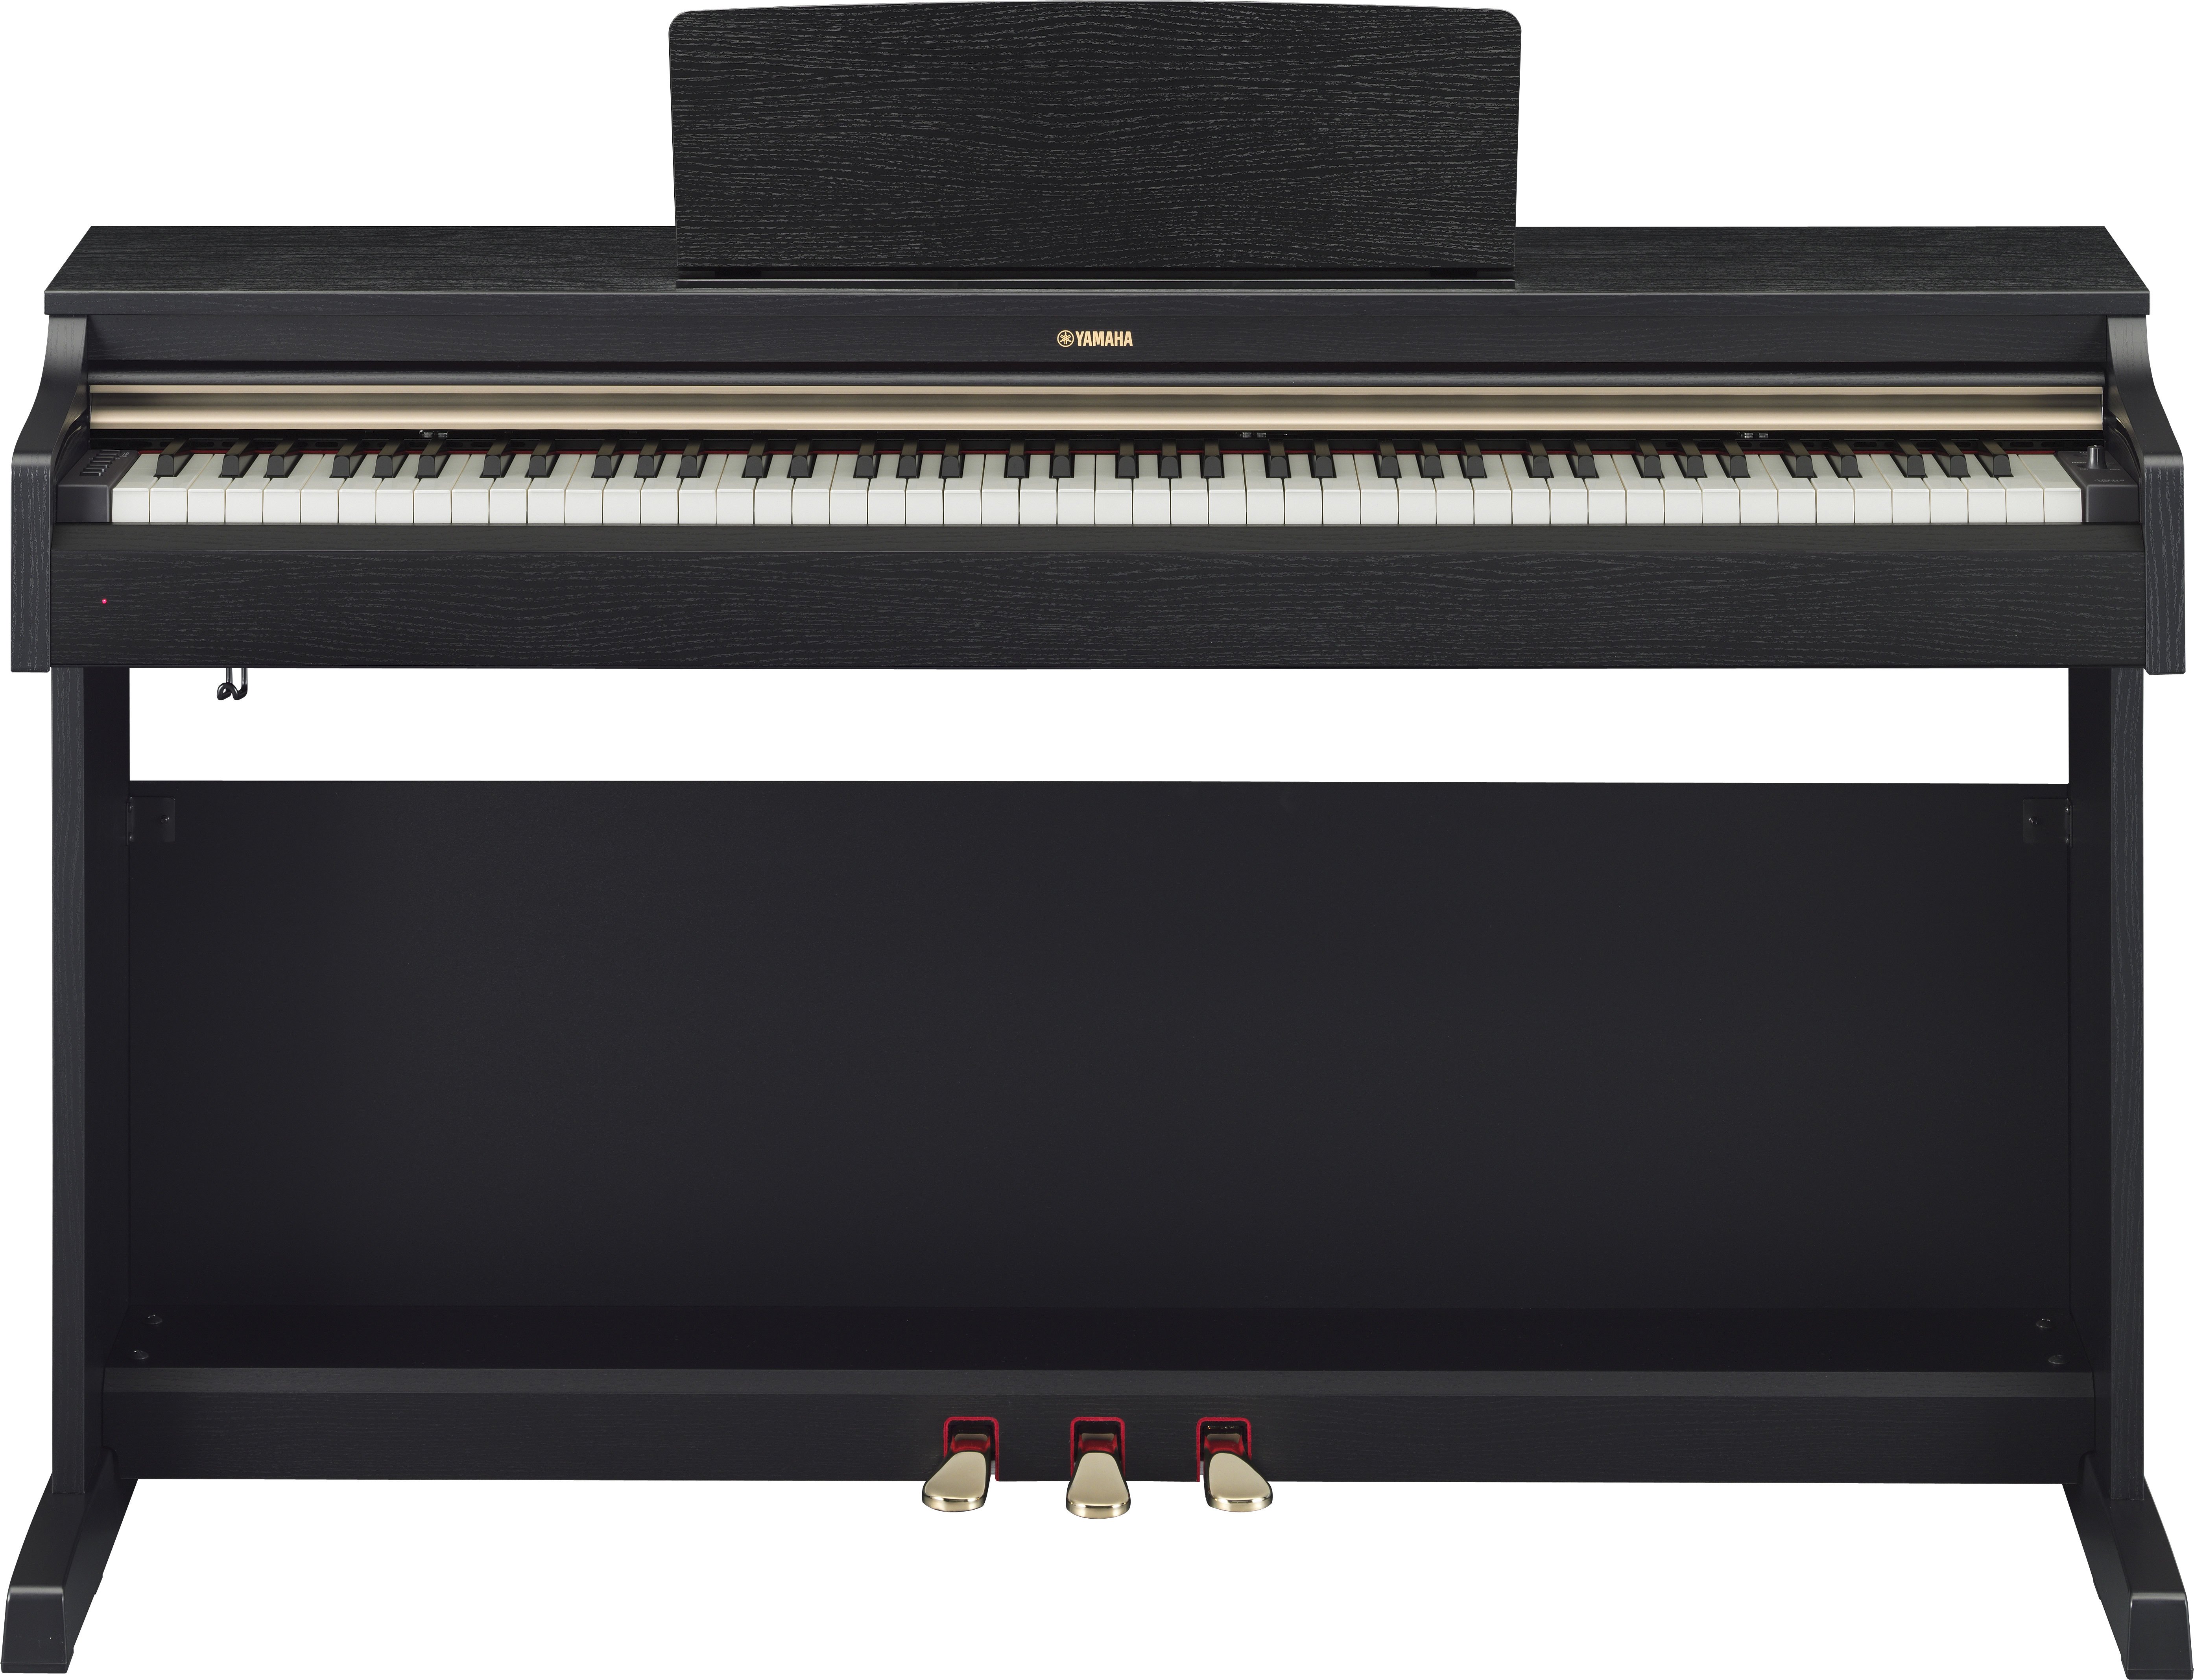 YDP-162 - Overview - ARIUS - Pianos - Musical Instruments 